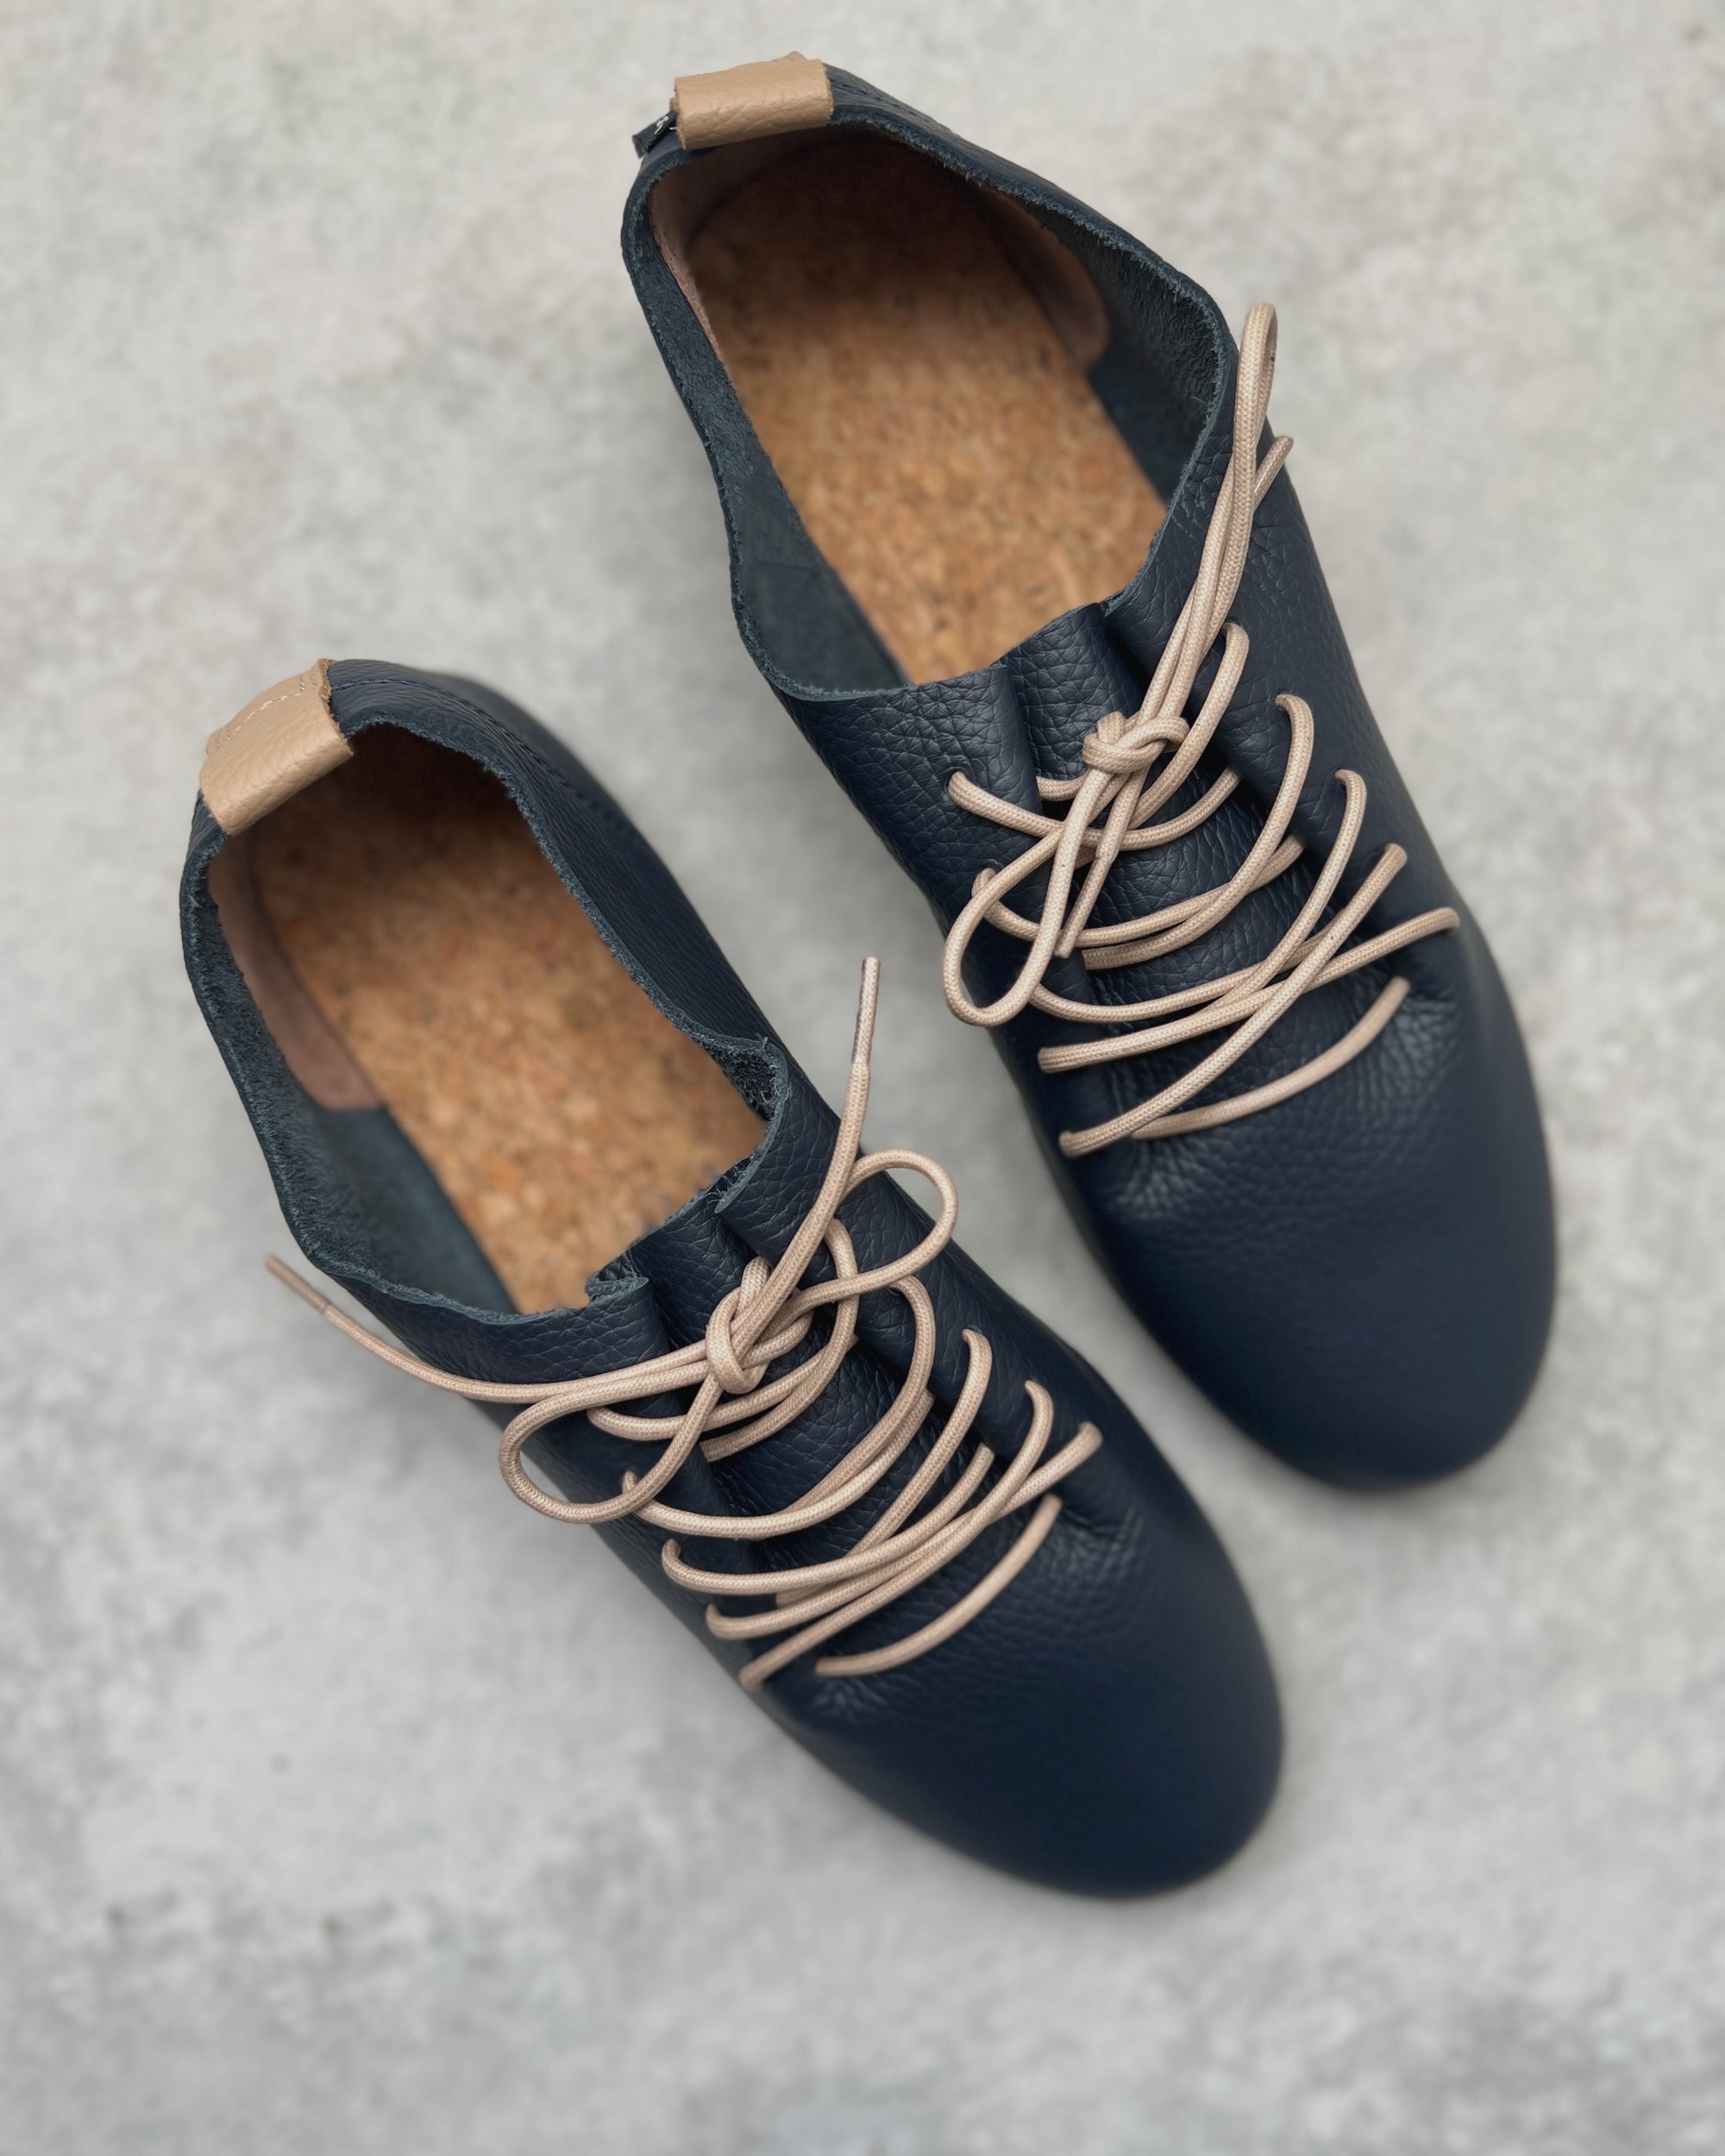 swaanarlberg : japanese leather shoes in blue and brown